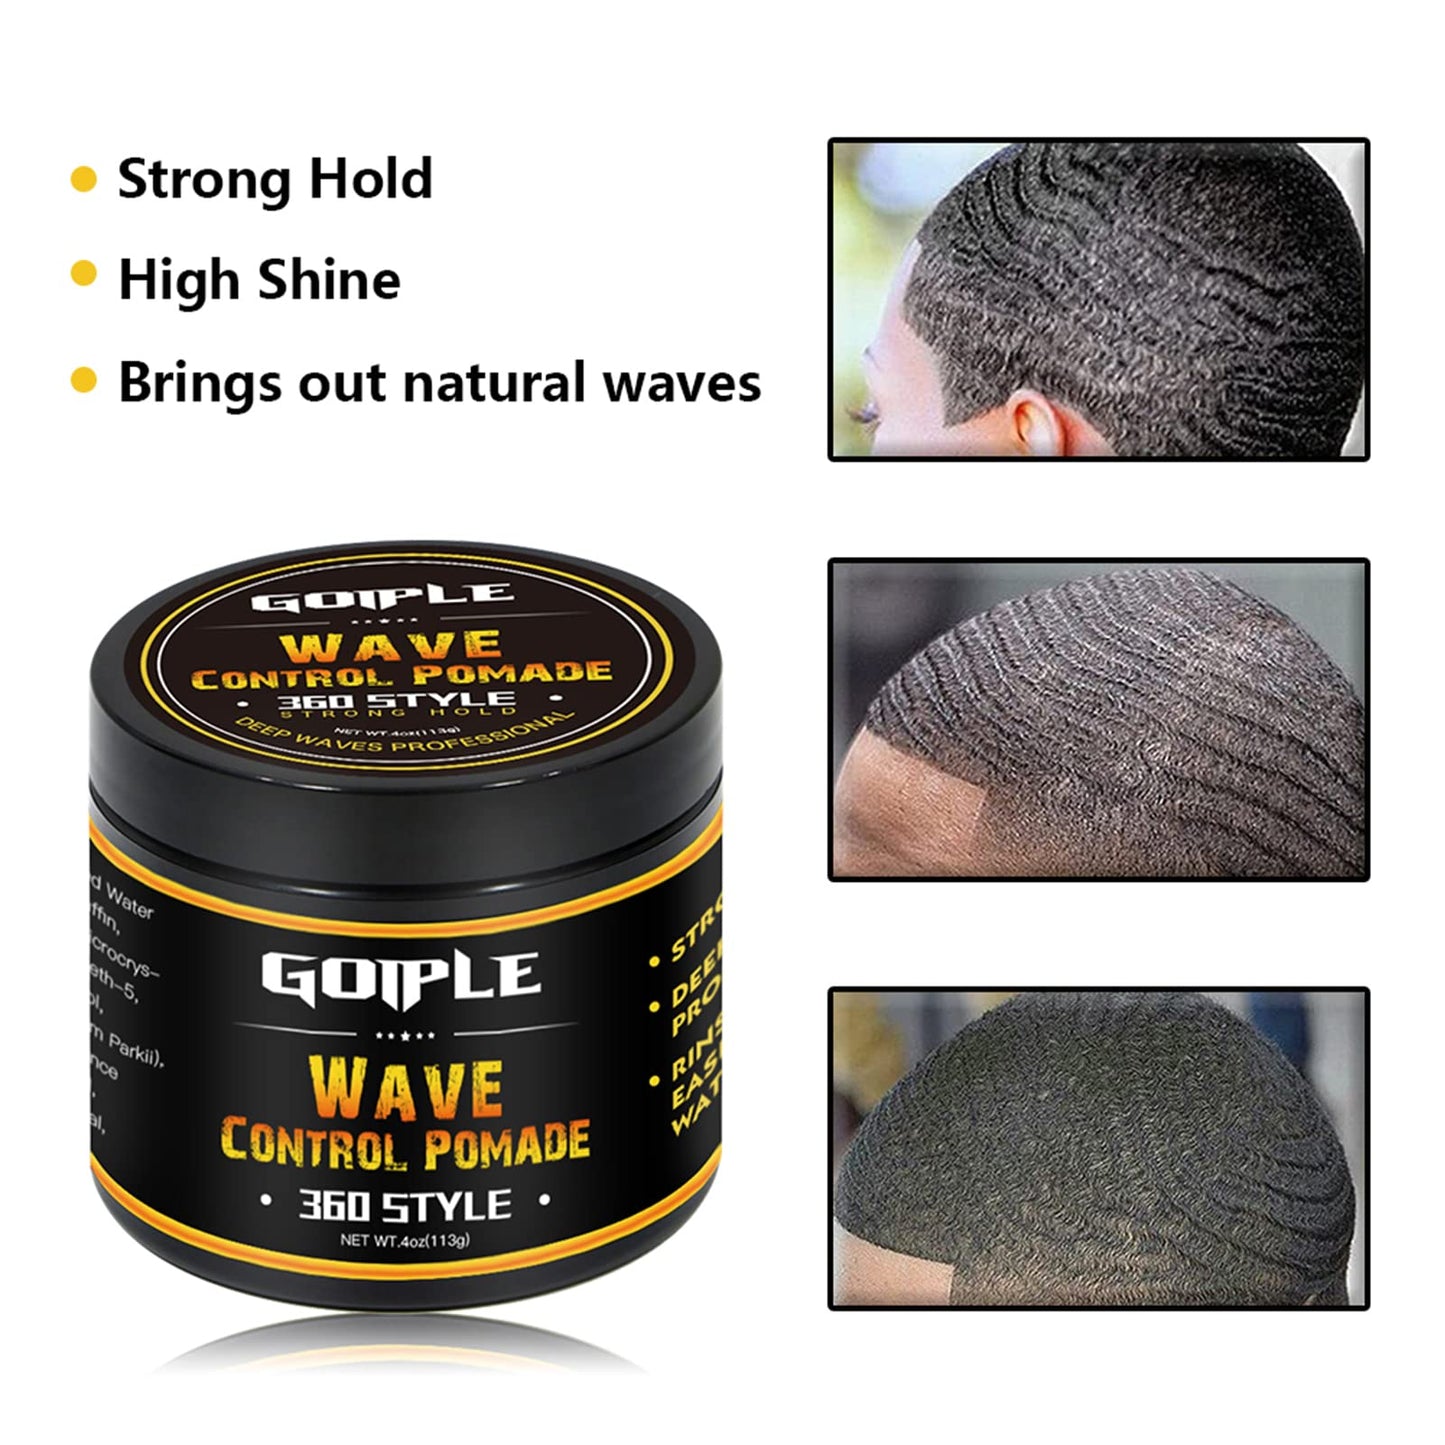 Natural Wave Pomade for Men Strong Hold, Easy Wash 360 Wave Training Hair Cream, Waves Grease for Men Promotes Layered Waves, Moisture, Control and Silky Shine 4oz